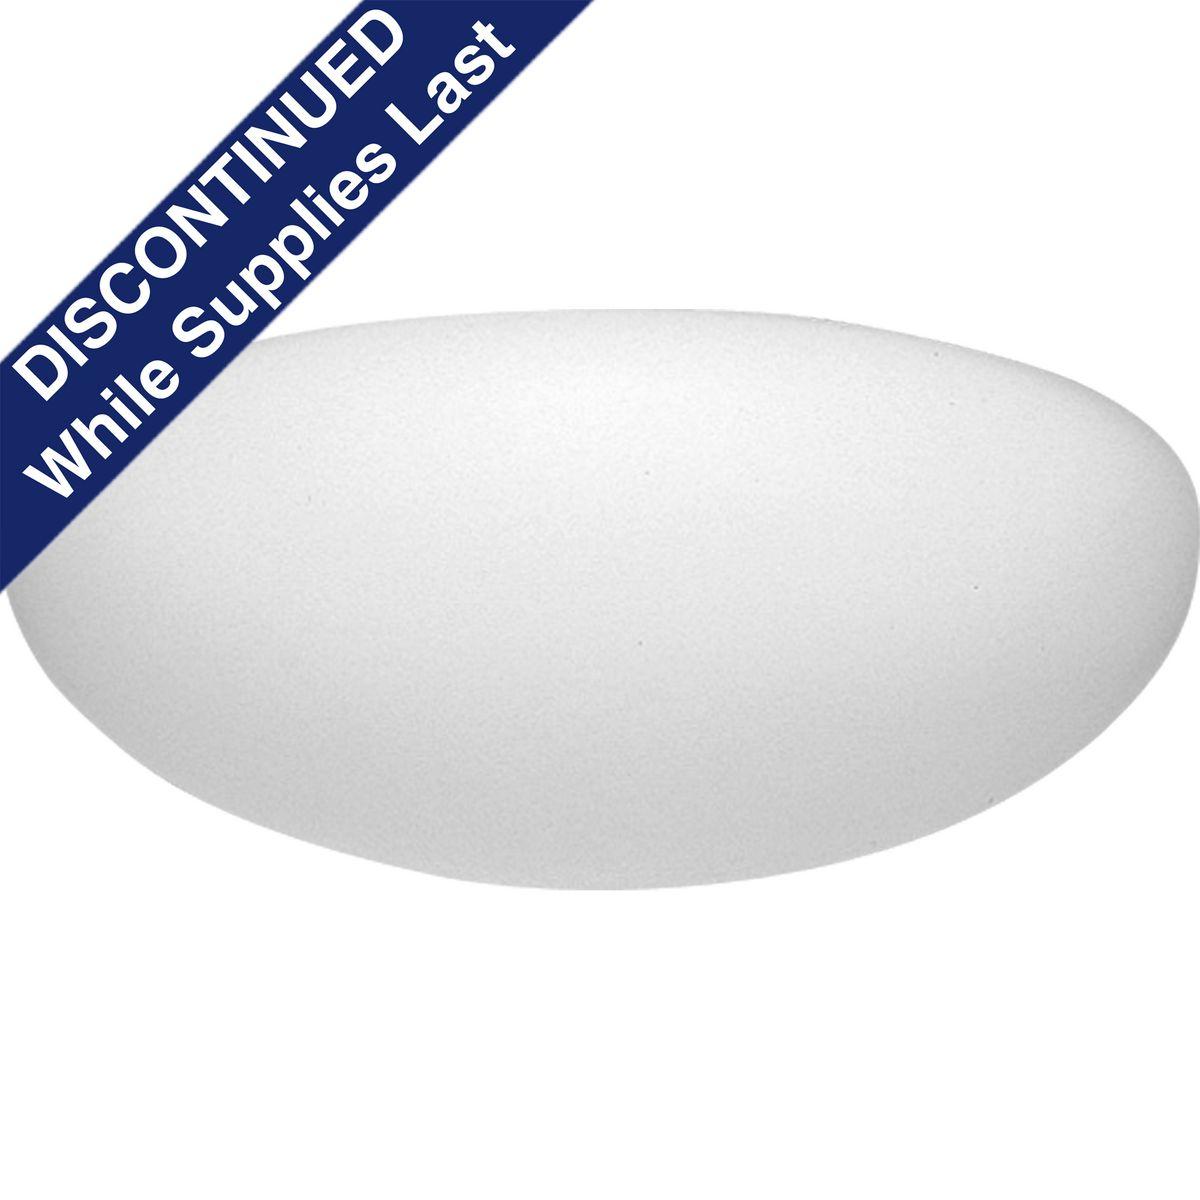 Hubbell P7309-60 This simple close-to-ceiling light from Progress Lighting is a great choice for minimalist design. The recessed chassis is hidden by the gently contoured white acrylic dome. This light uses two 72-watt fluorescent bulbs for energy-efficient illumination. 